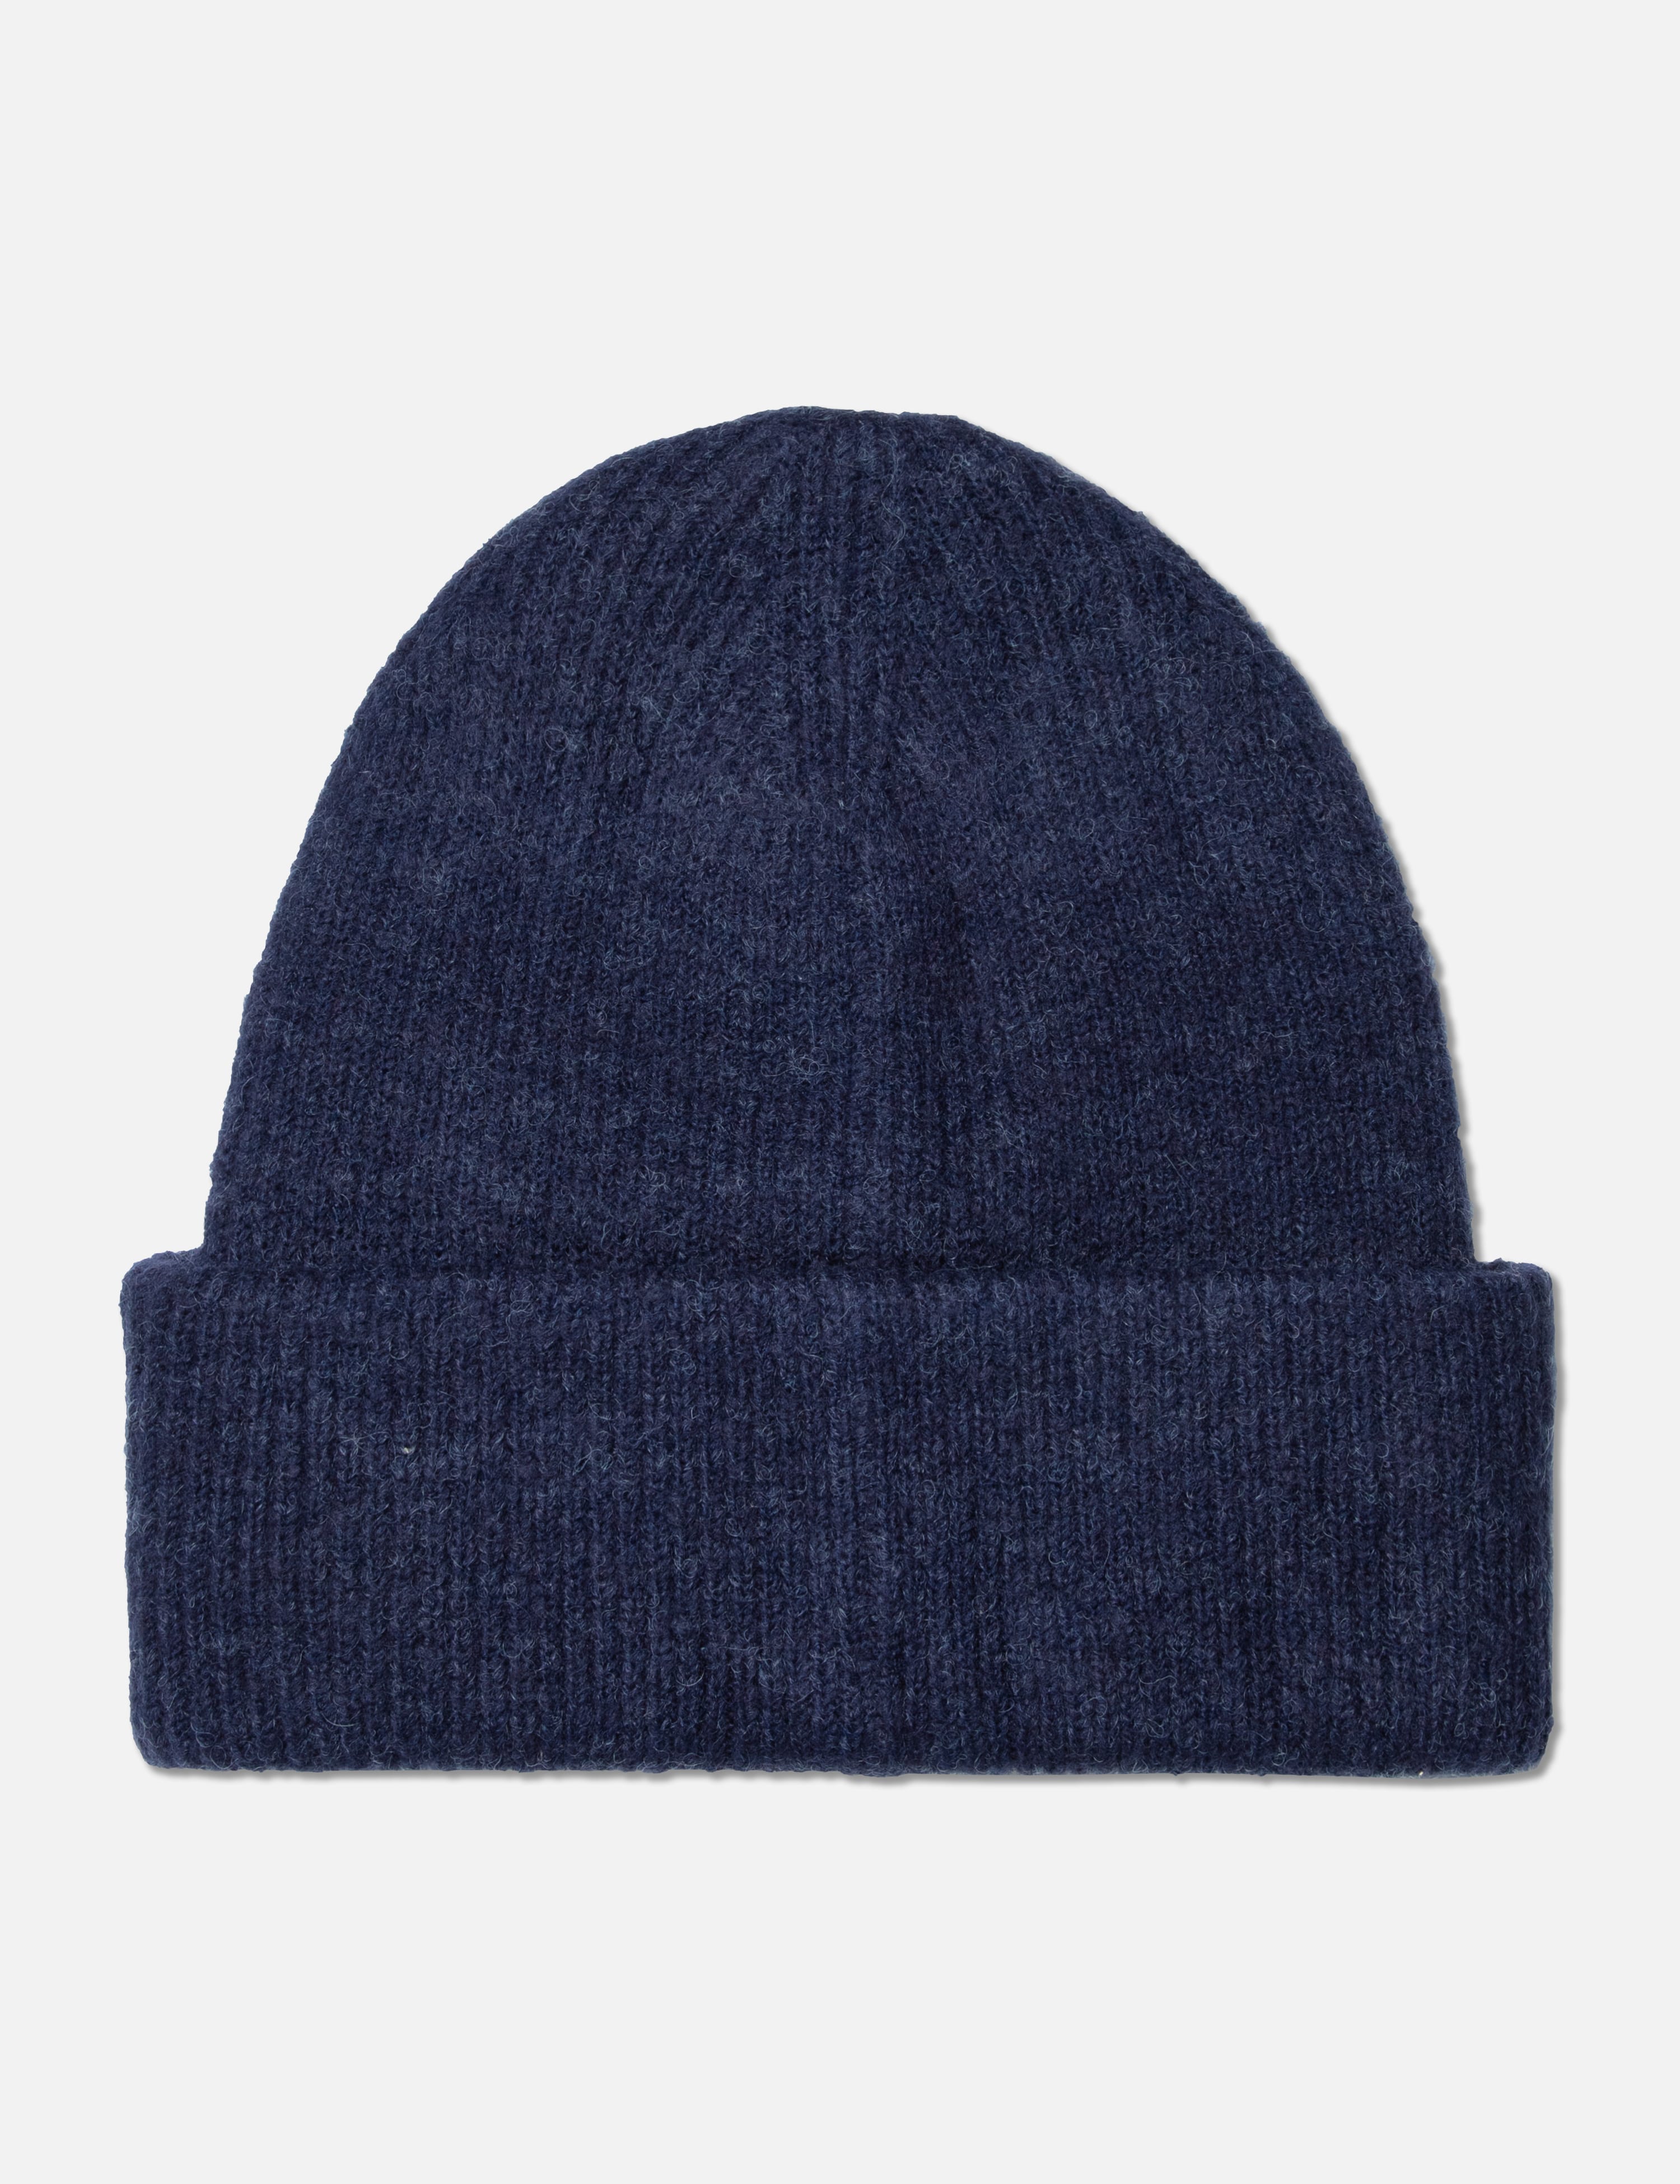 Human Made - BIG BEANIE | HBX - Globally Curated Fashion and